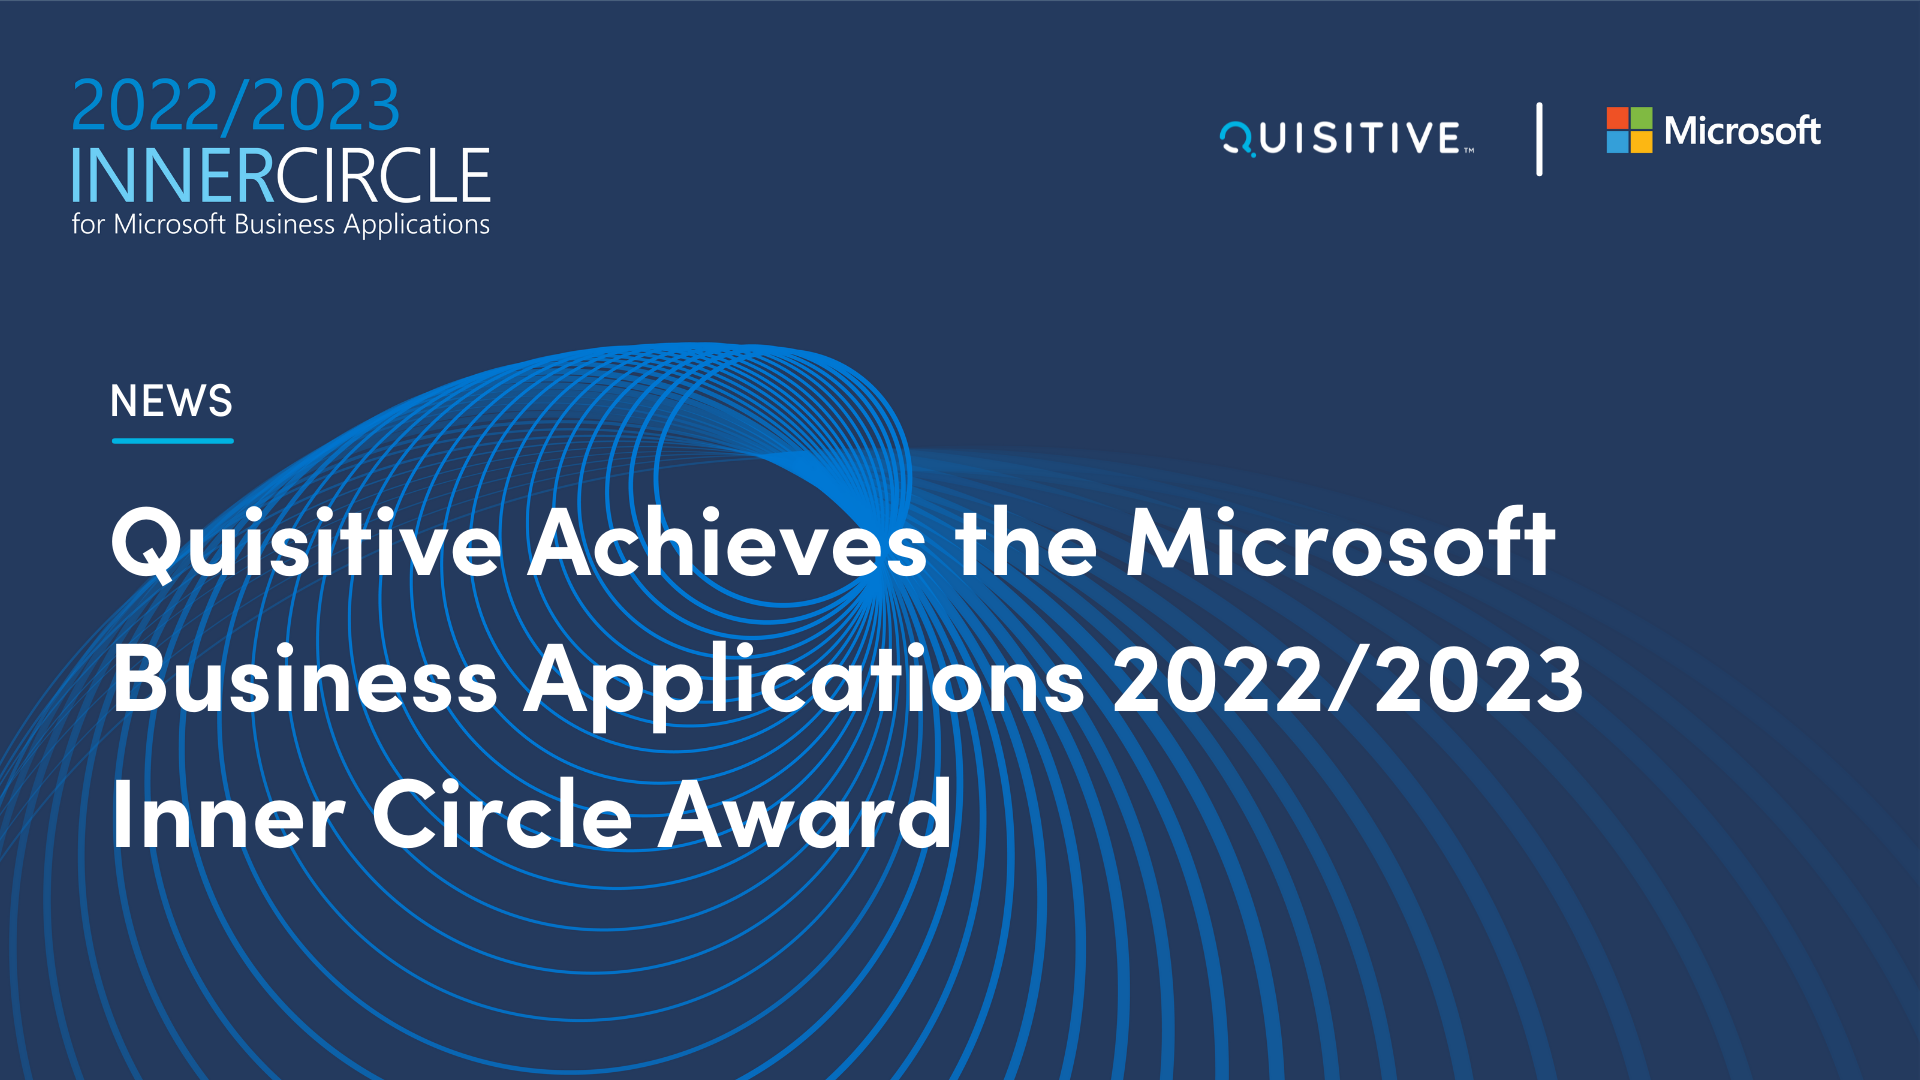 image reads Quisitive Achieves the Microsoft Business Appplications 2022/2023 Inner Circle Award